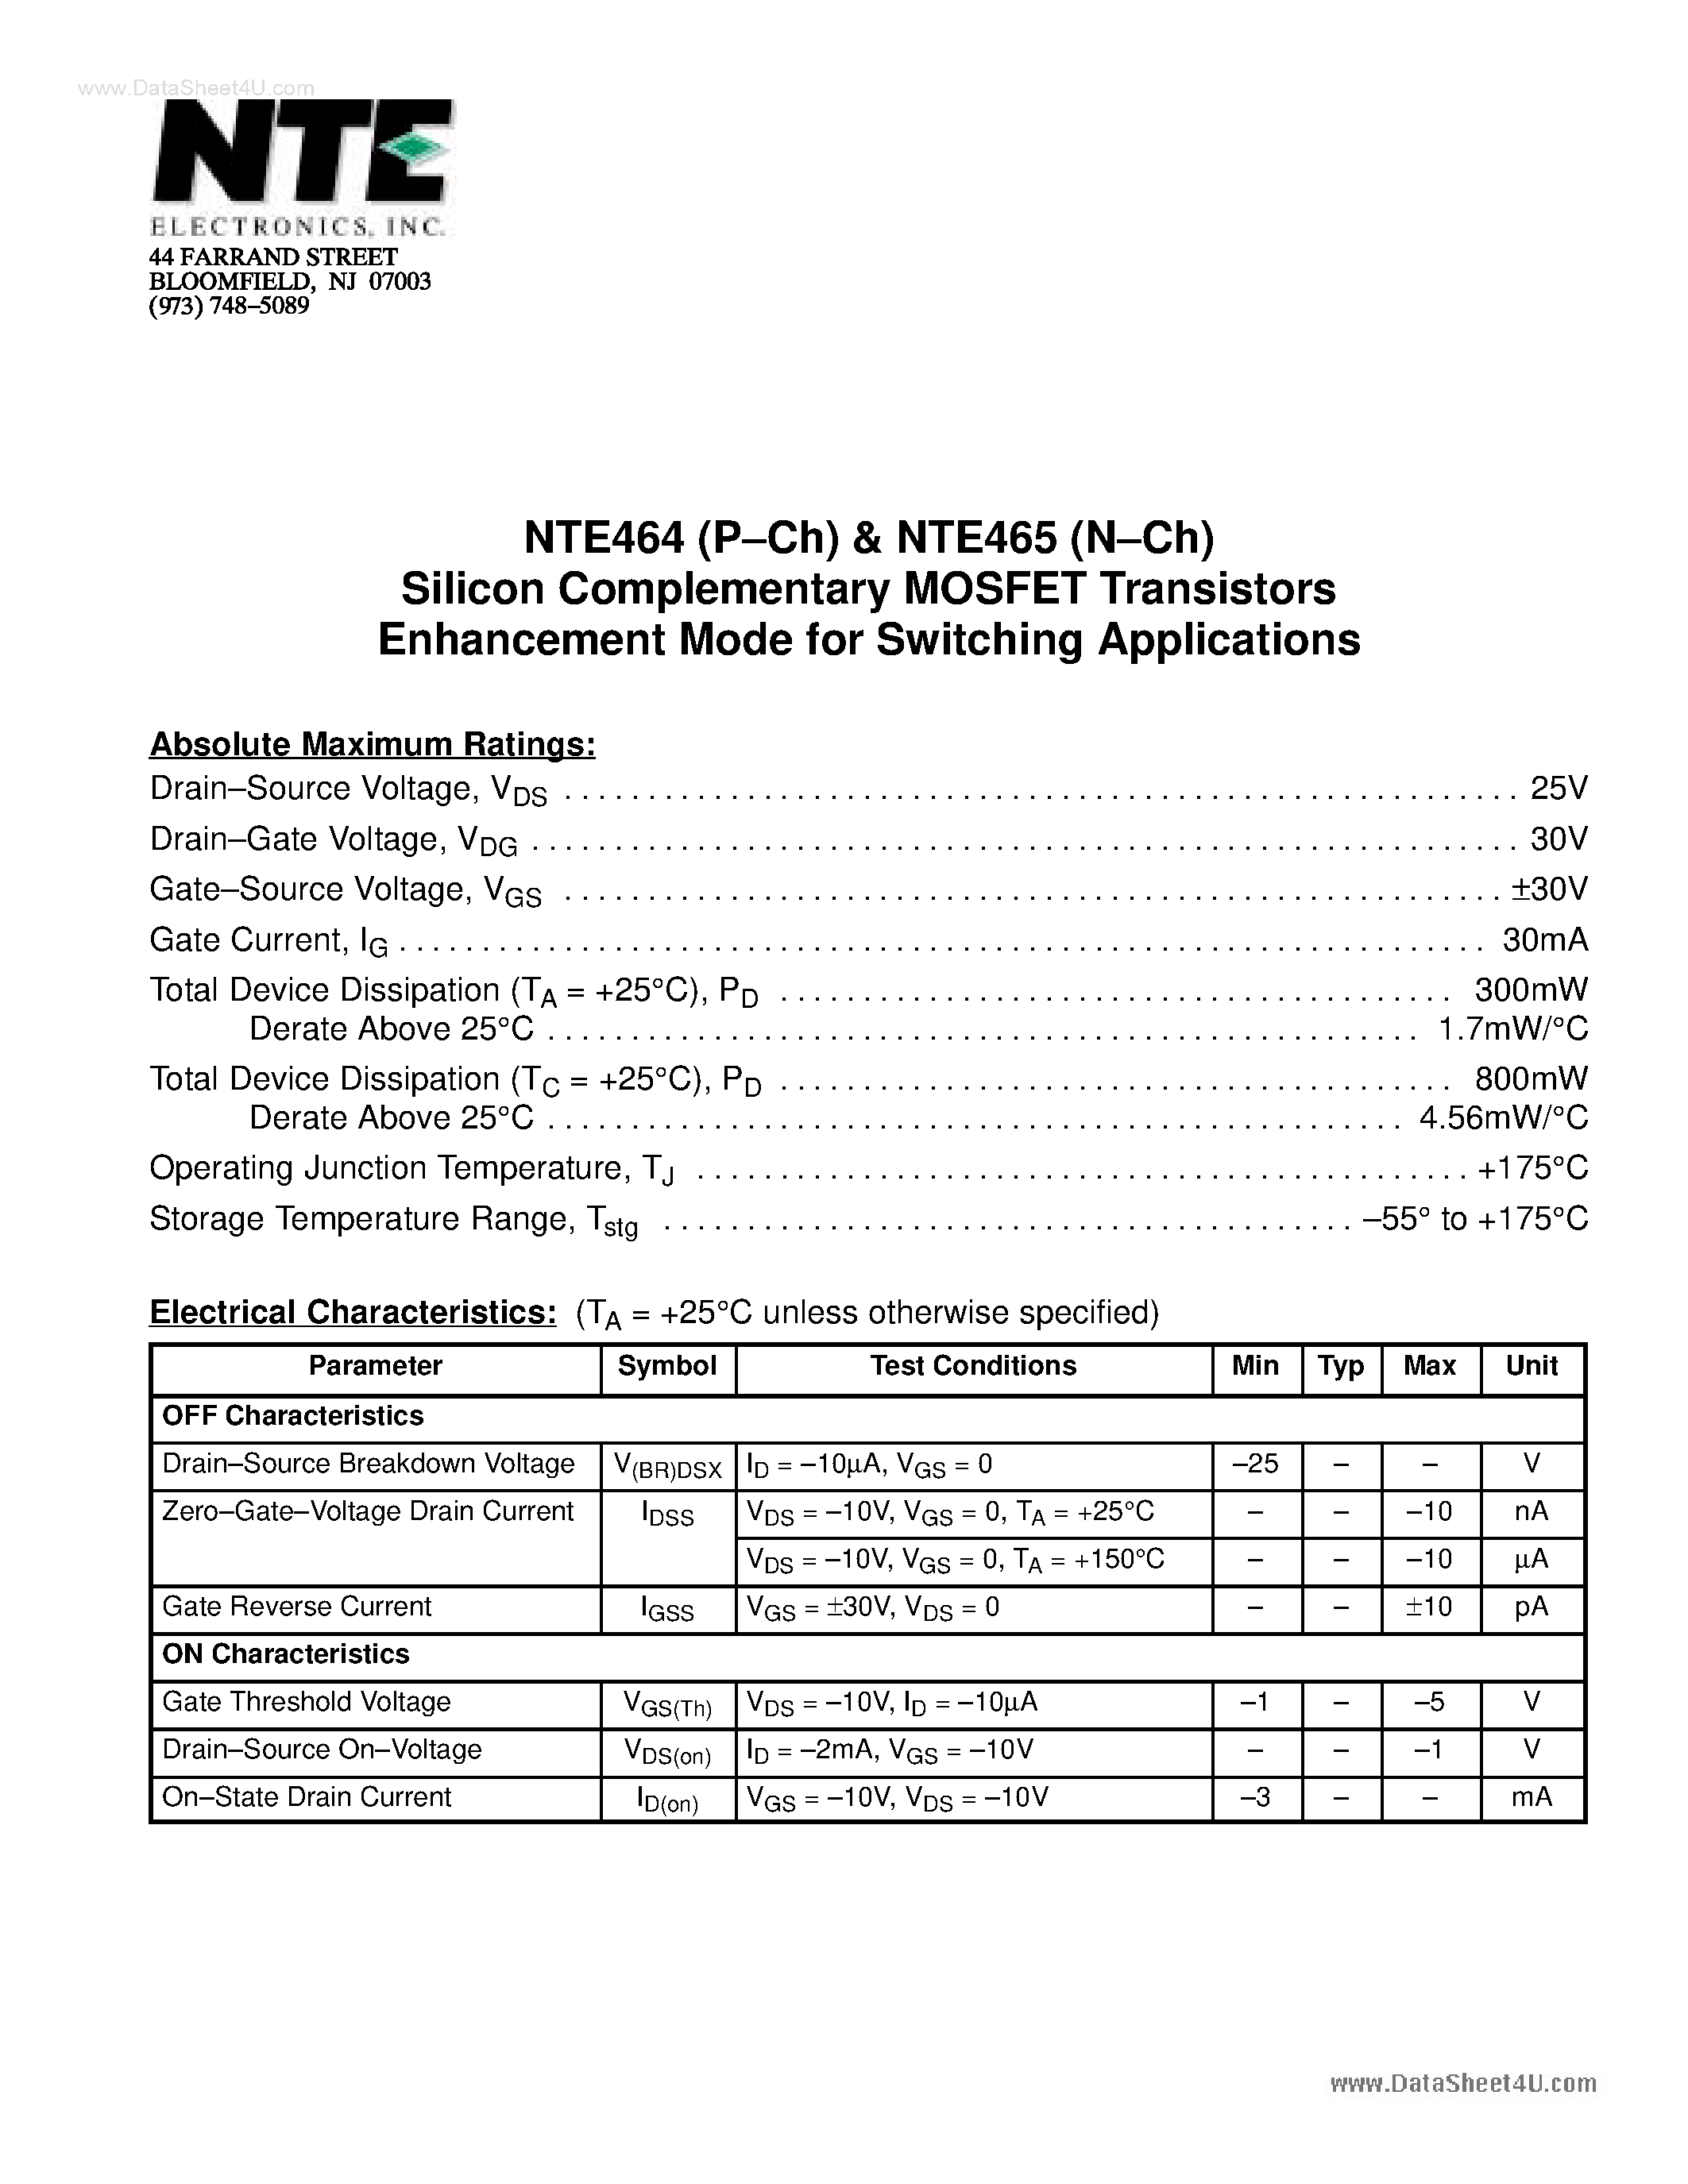 Datasheet NTE465(N-Ch) - Silicon Complementary MOSFET Transistors Enhancement Mode for Switching Applications page 1